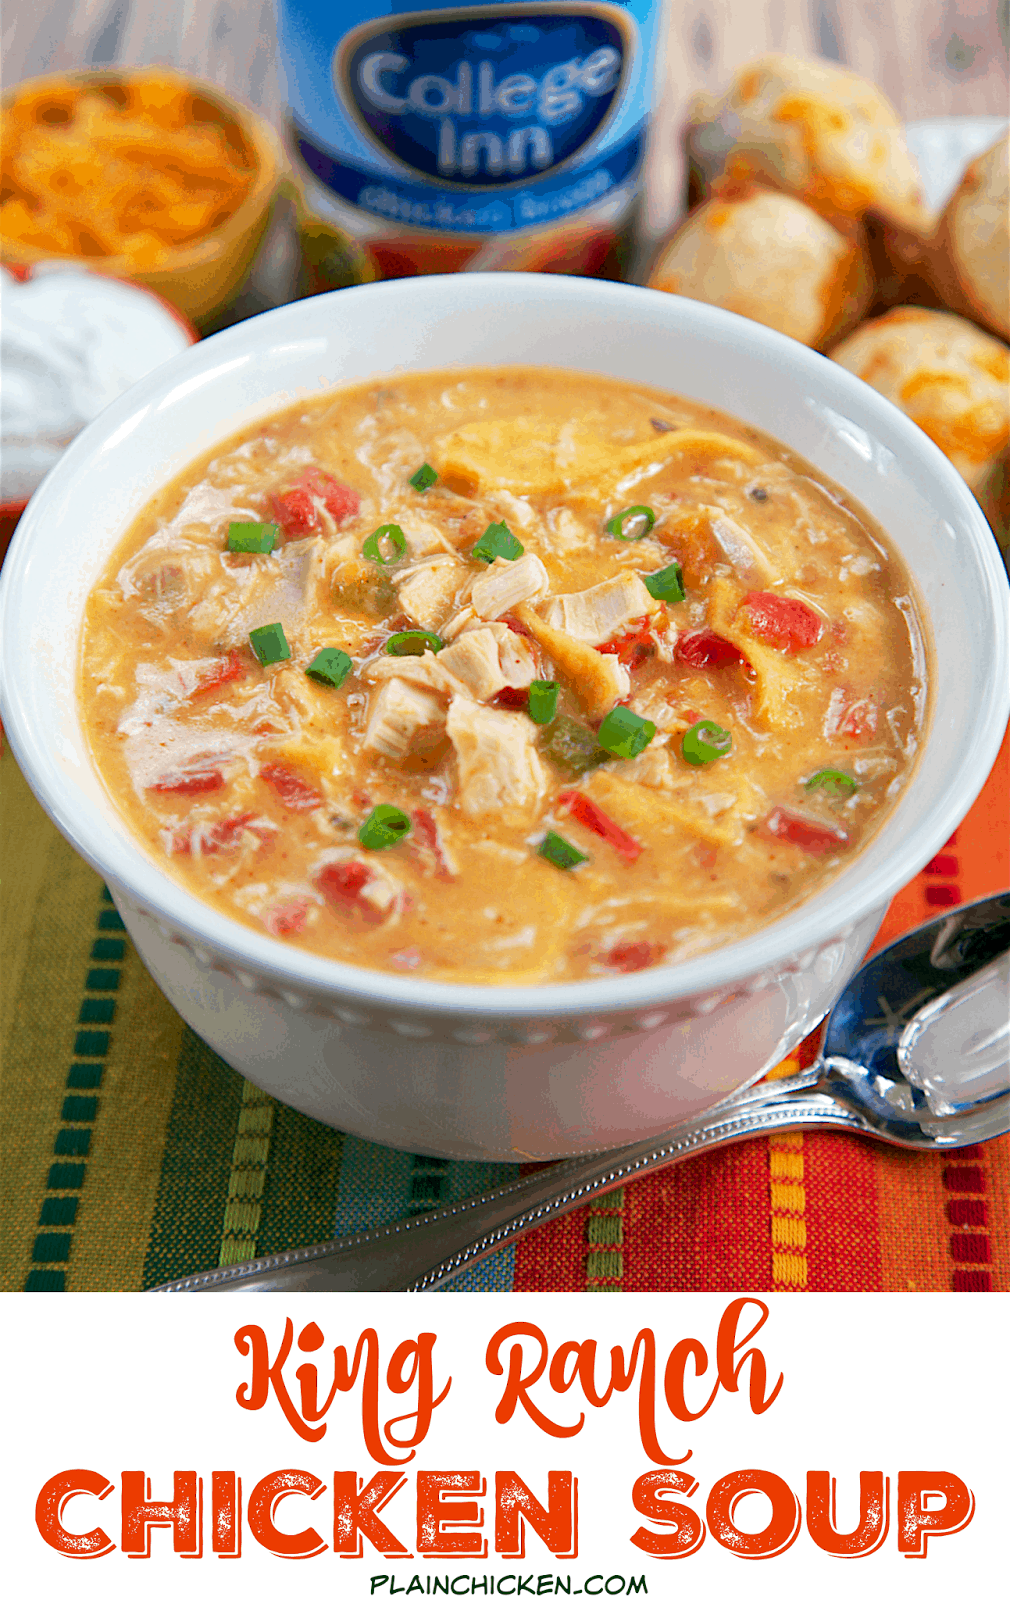 King Ranch Chicken Soup - THE BEST soup I've ever made! All the flavors of King Ranch Casserole in soup form. Rotisserie chicken (or leftover turkey), cream of chicken, cream of mushroom, Rotel tomatoes, spices, College Inn chicken broth, Velveeta and tortillas. Ready in under 30 minutes. Can also make in slow cooker.